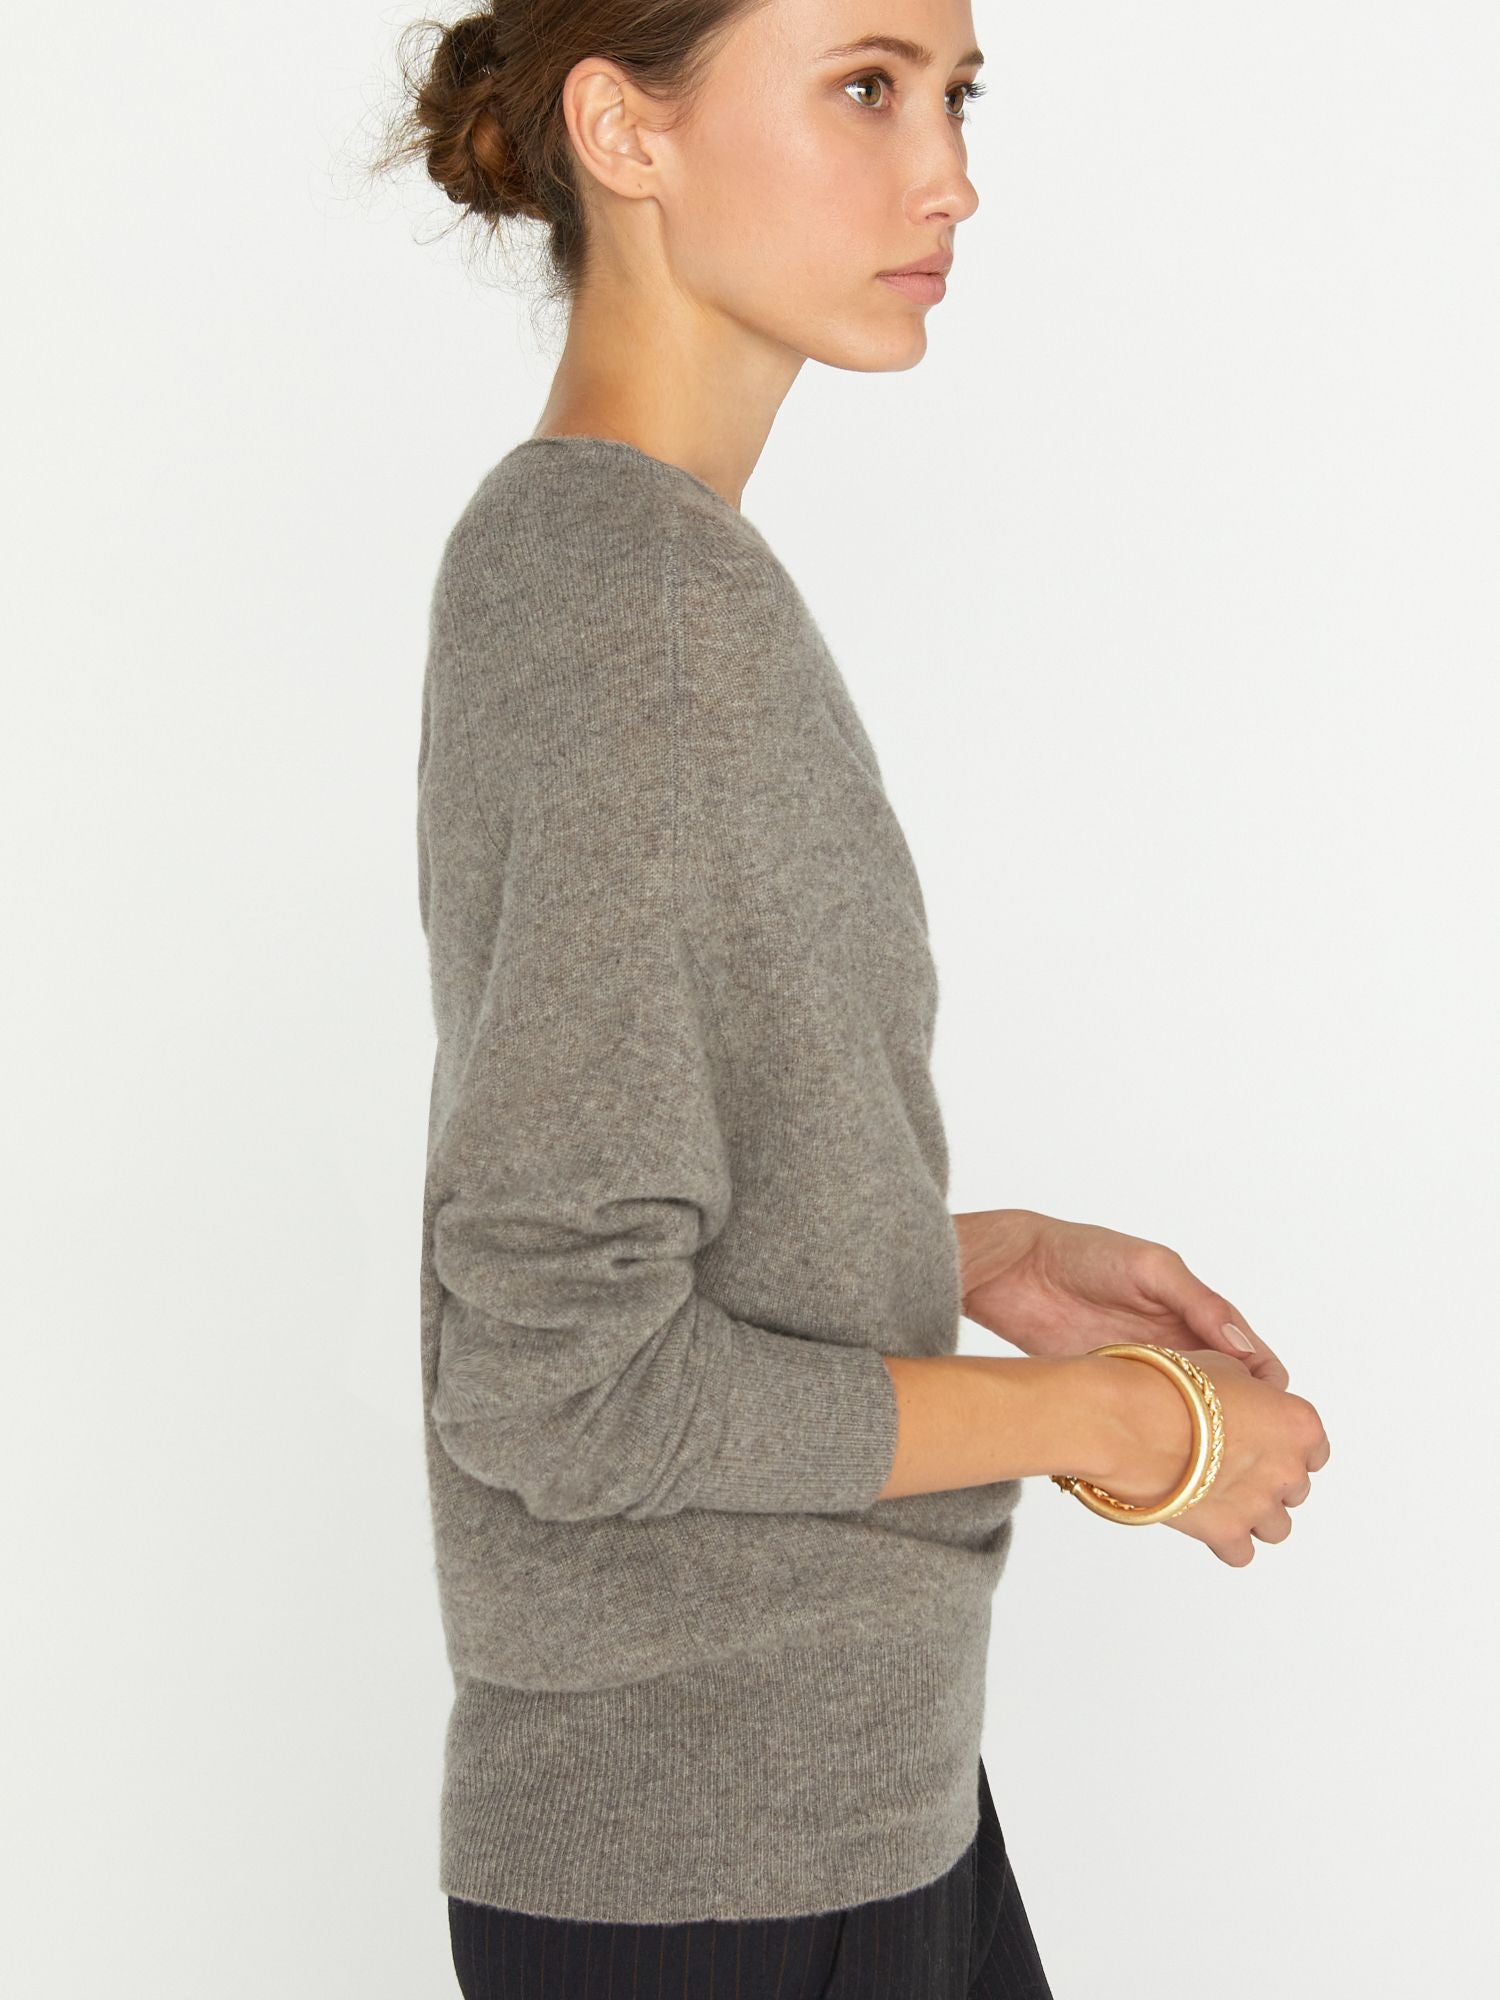 Lori cashmere off shoulder grey sweater side view